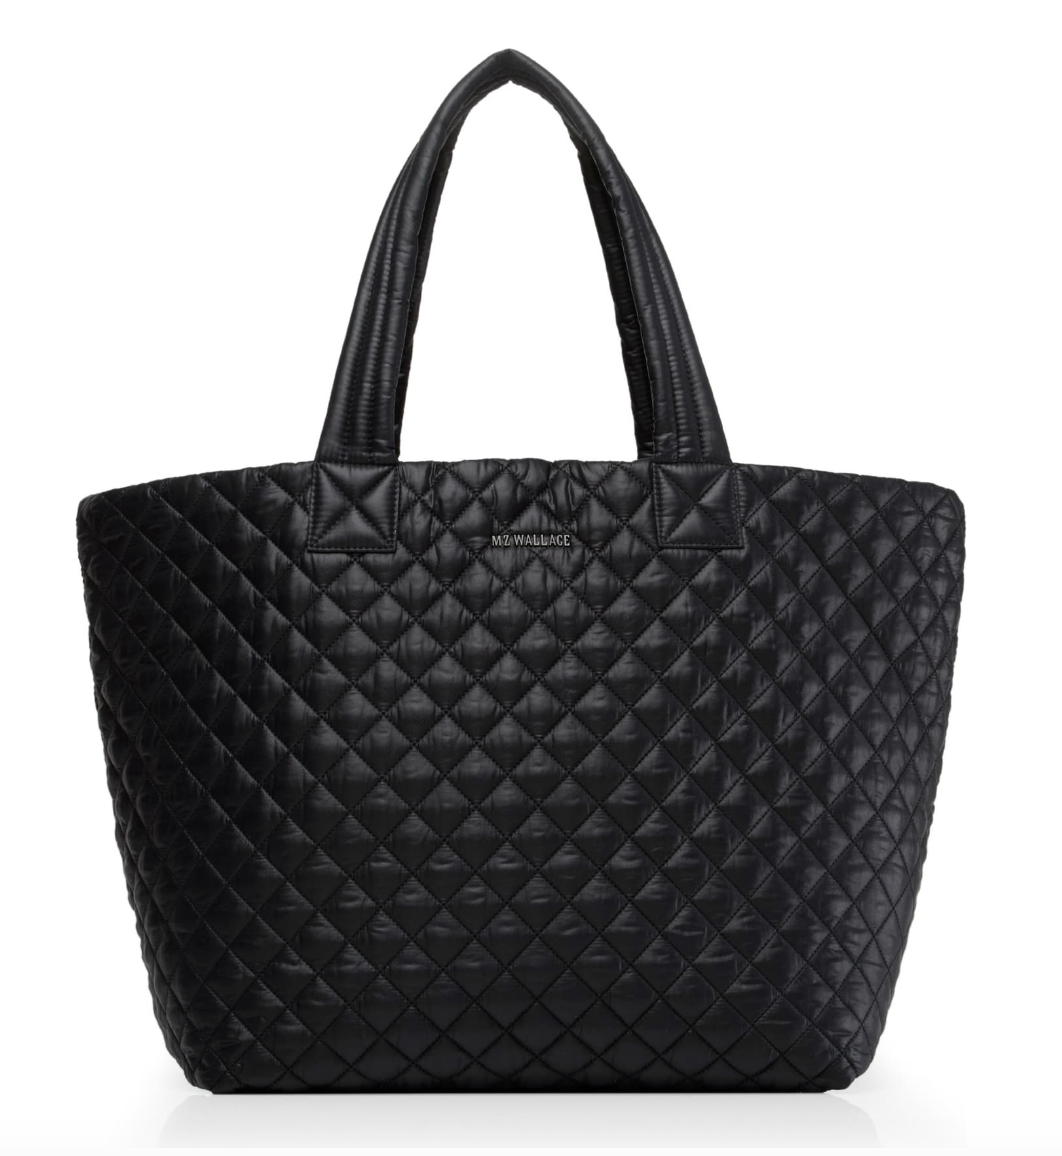 MZ Wallace Large Metro Tote - $235 from Nordstrom